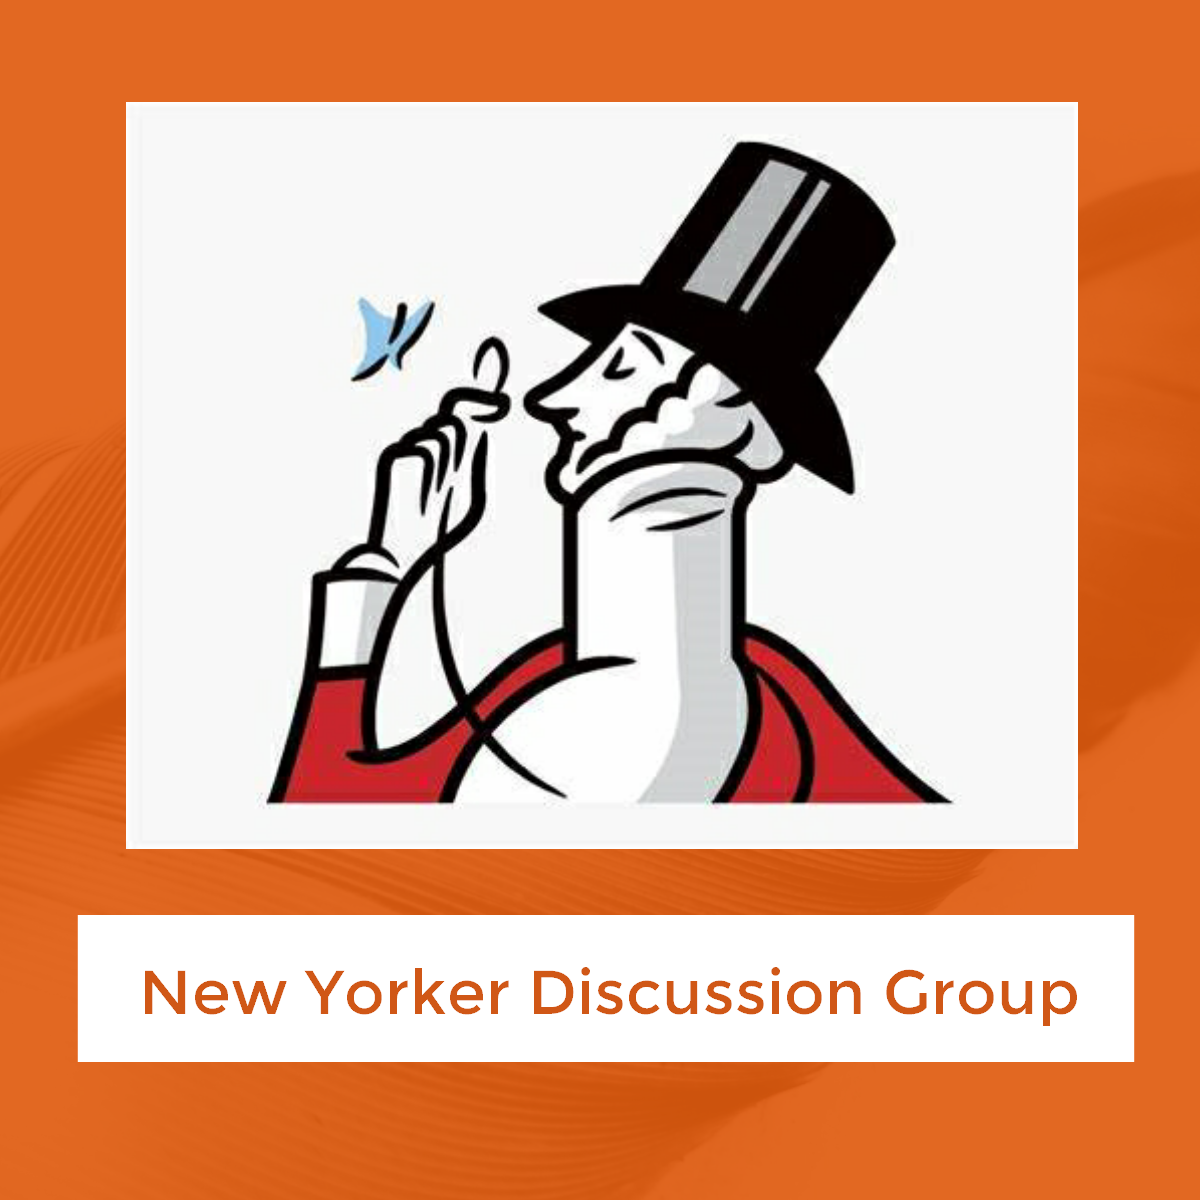 New Yorker Discussion Group